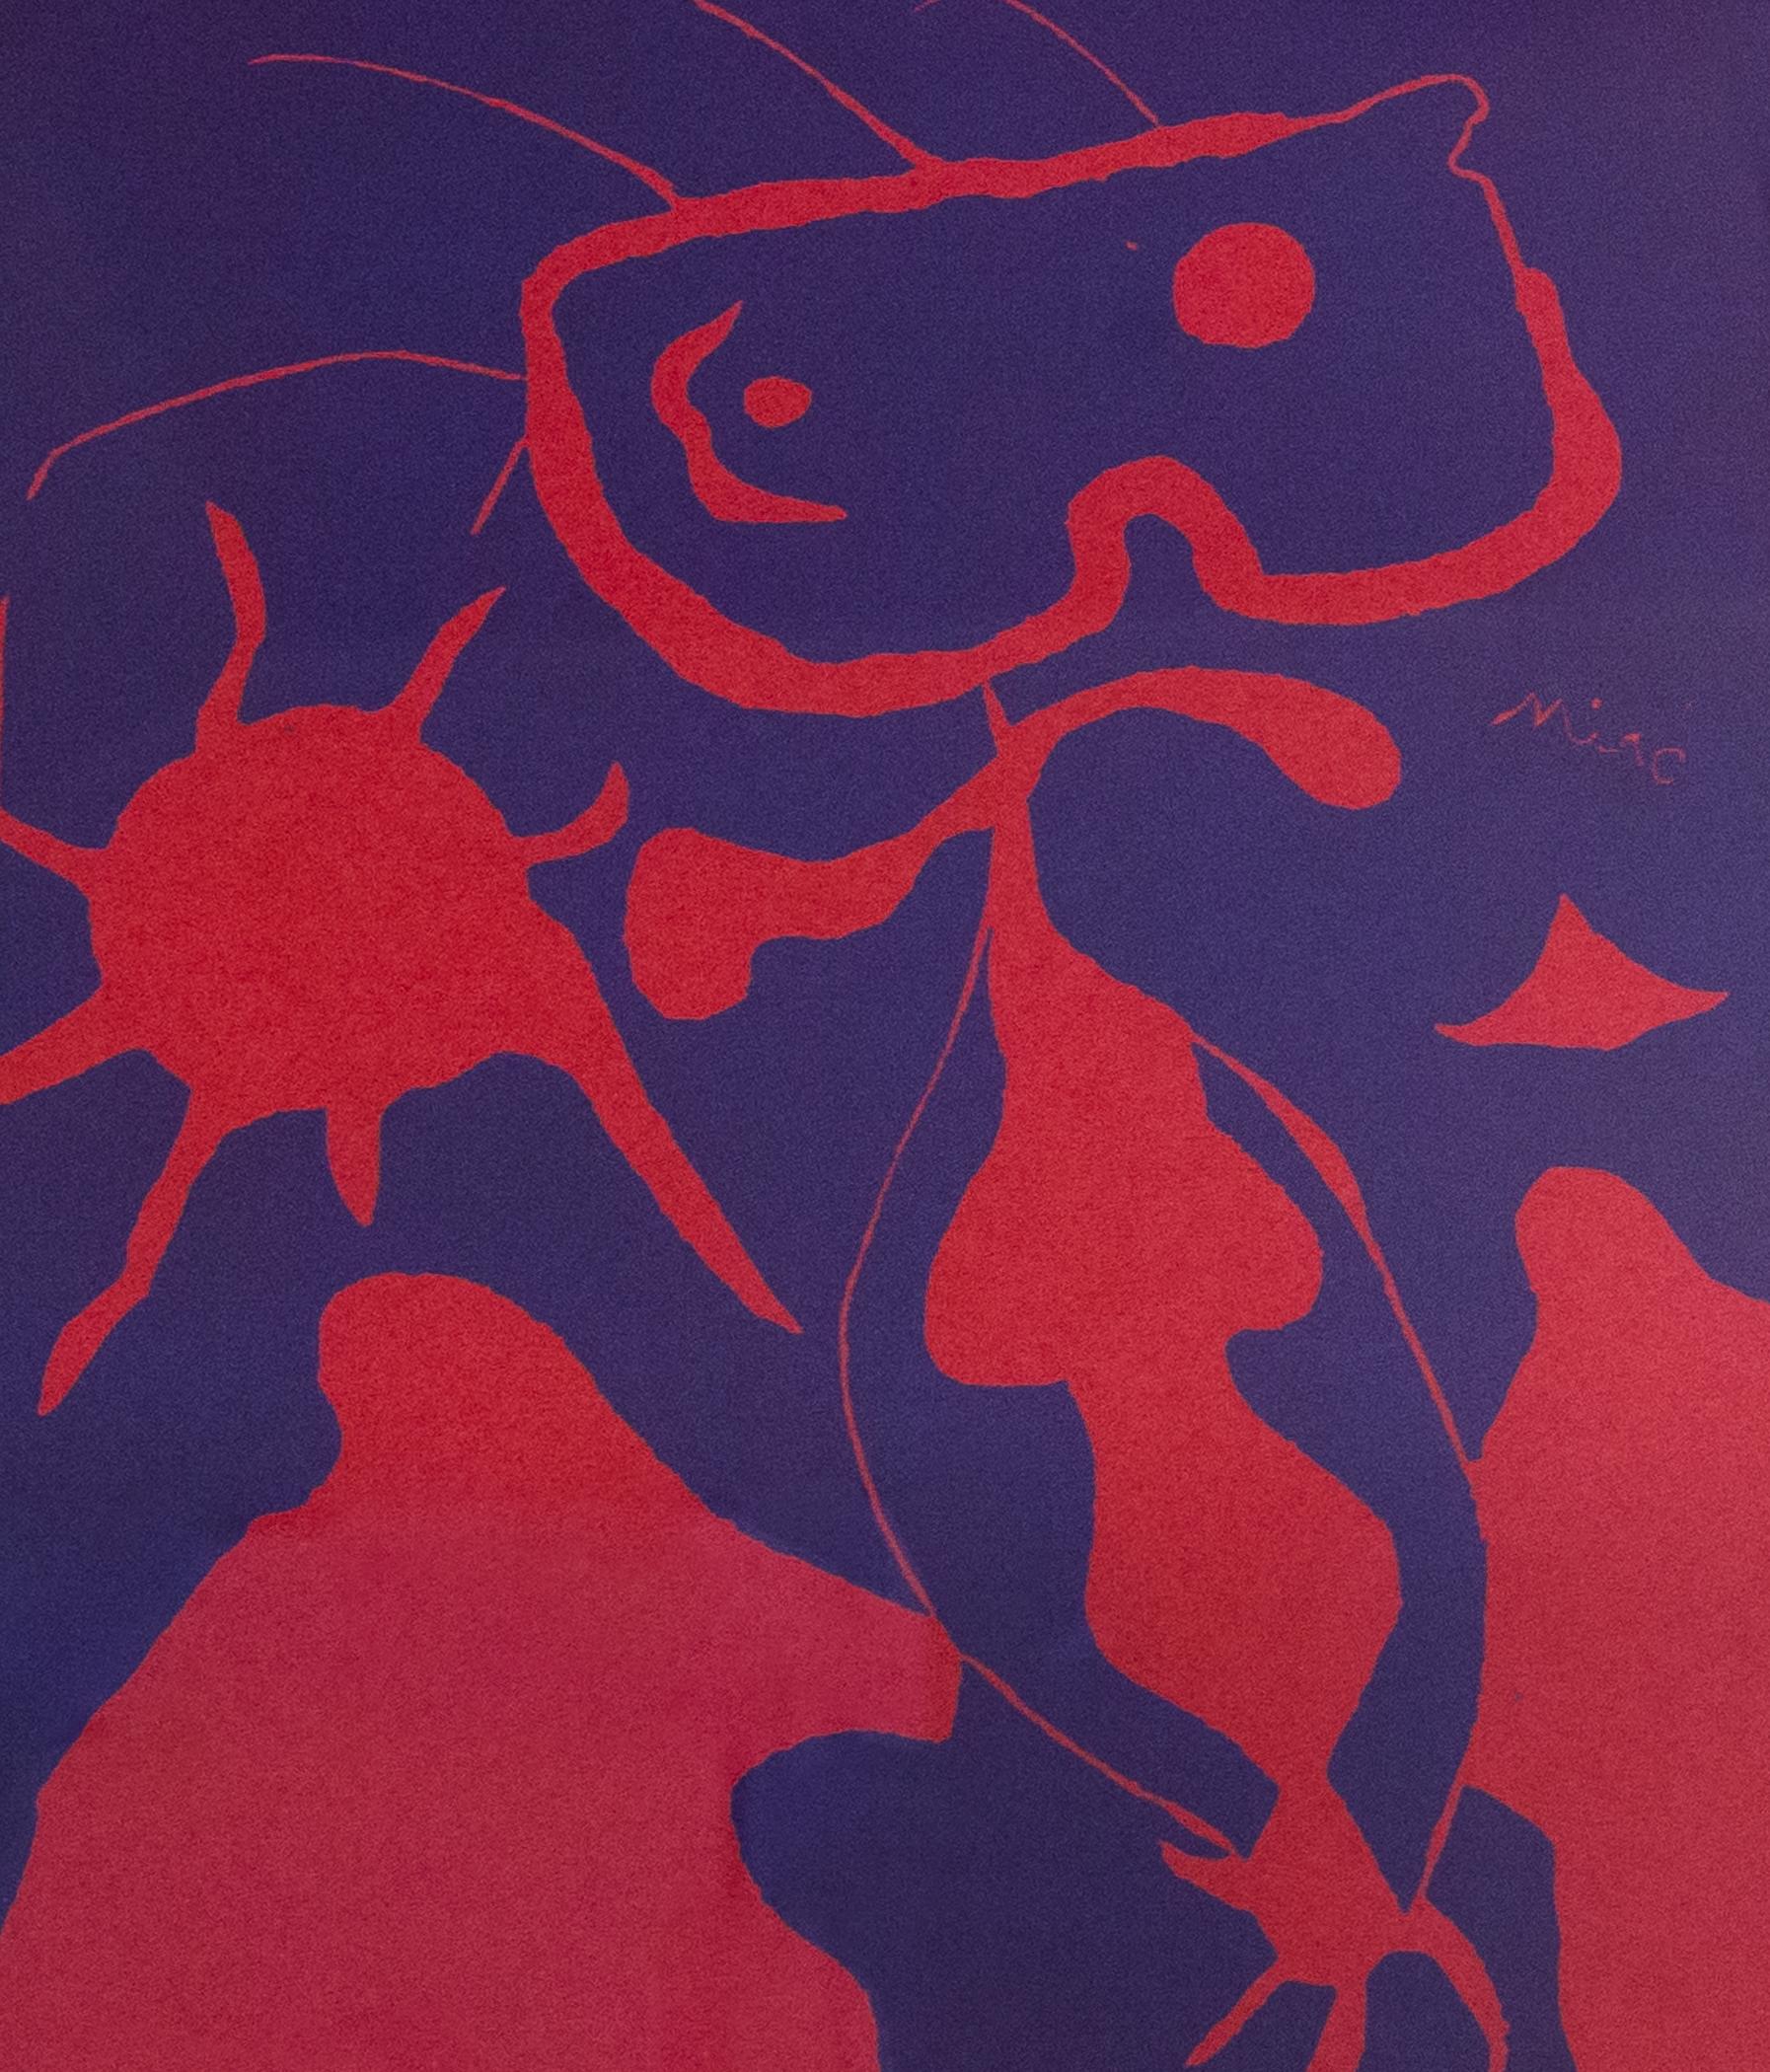 Joan Miró Abstract Print – Junge mit roter Sonne